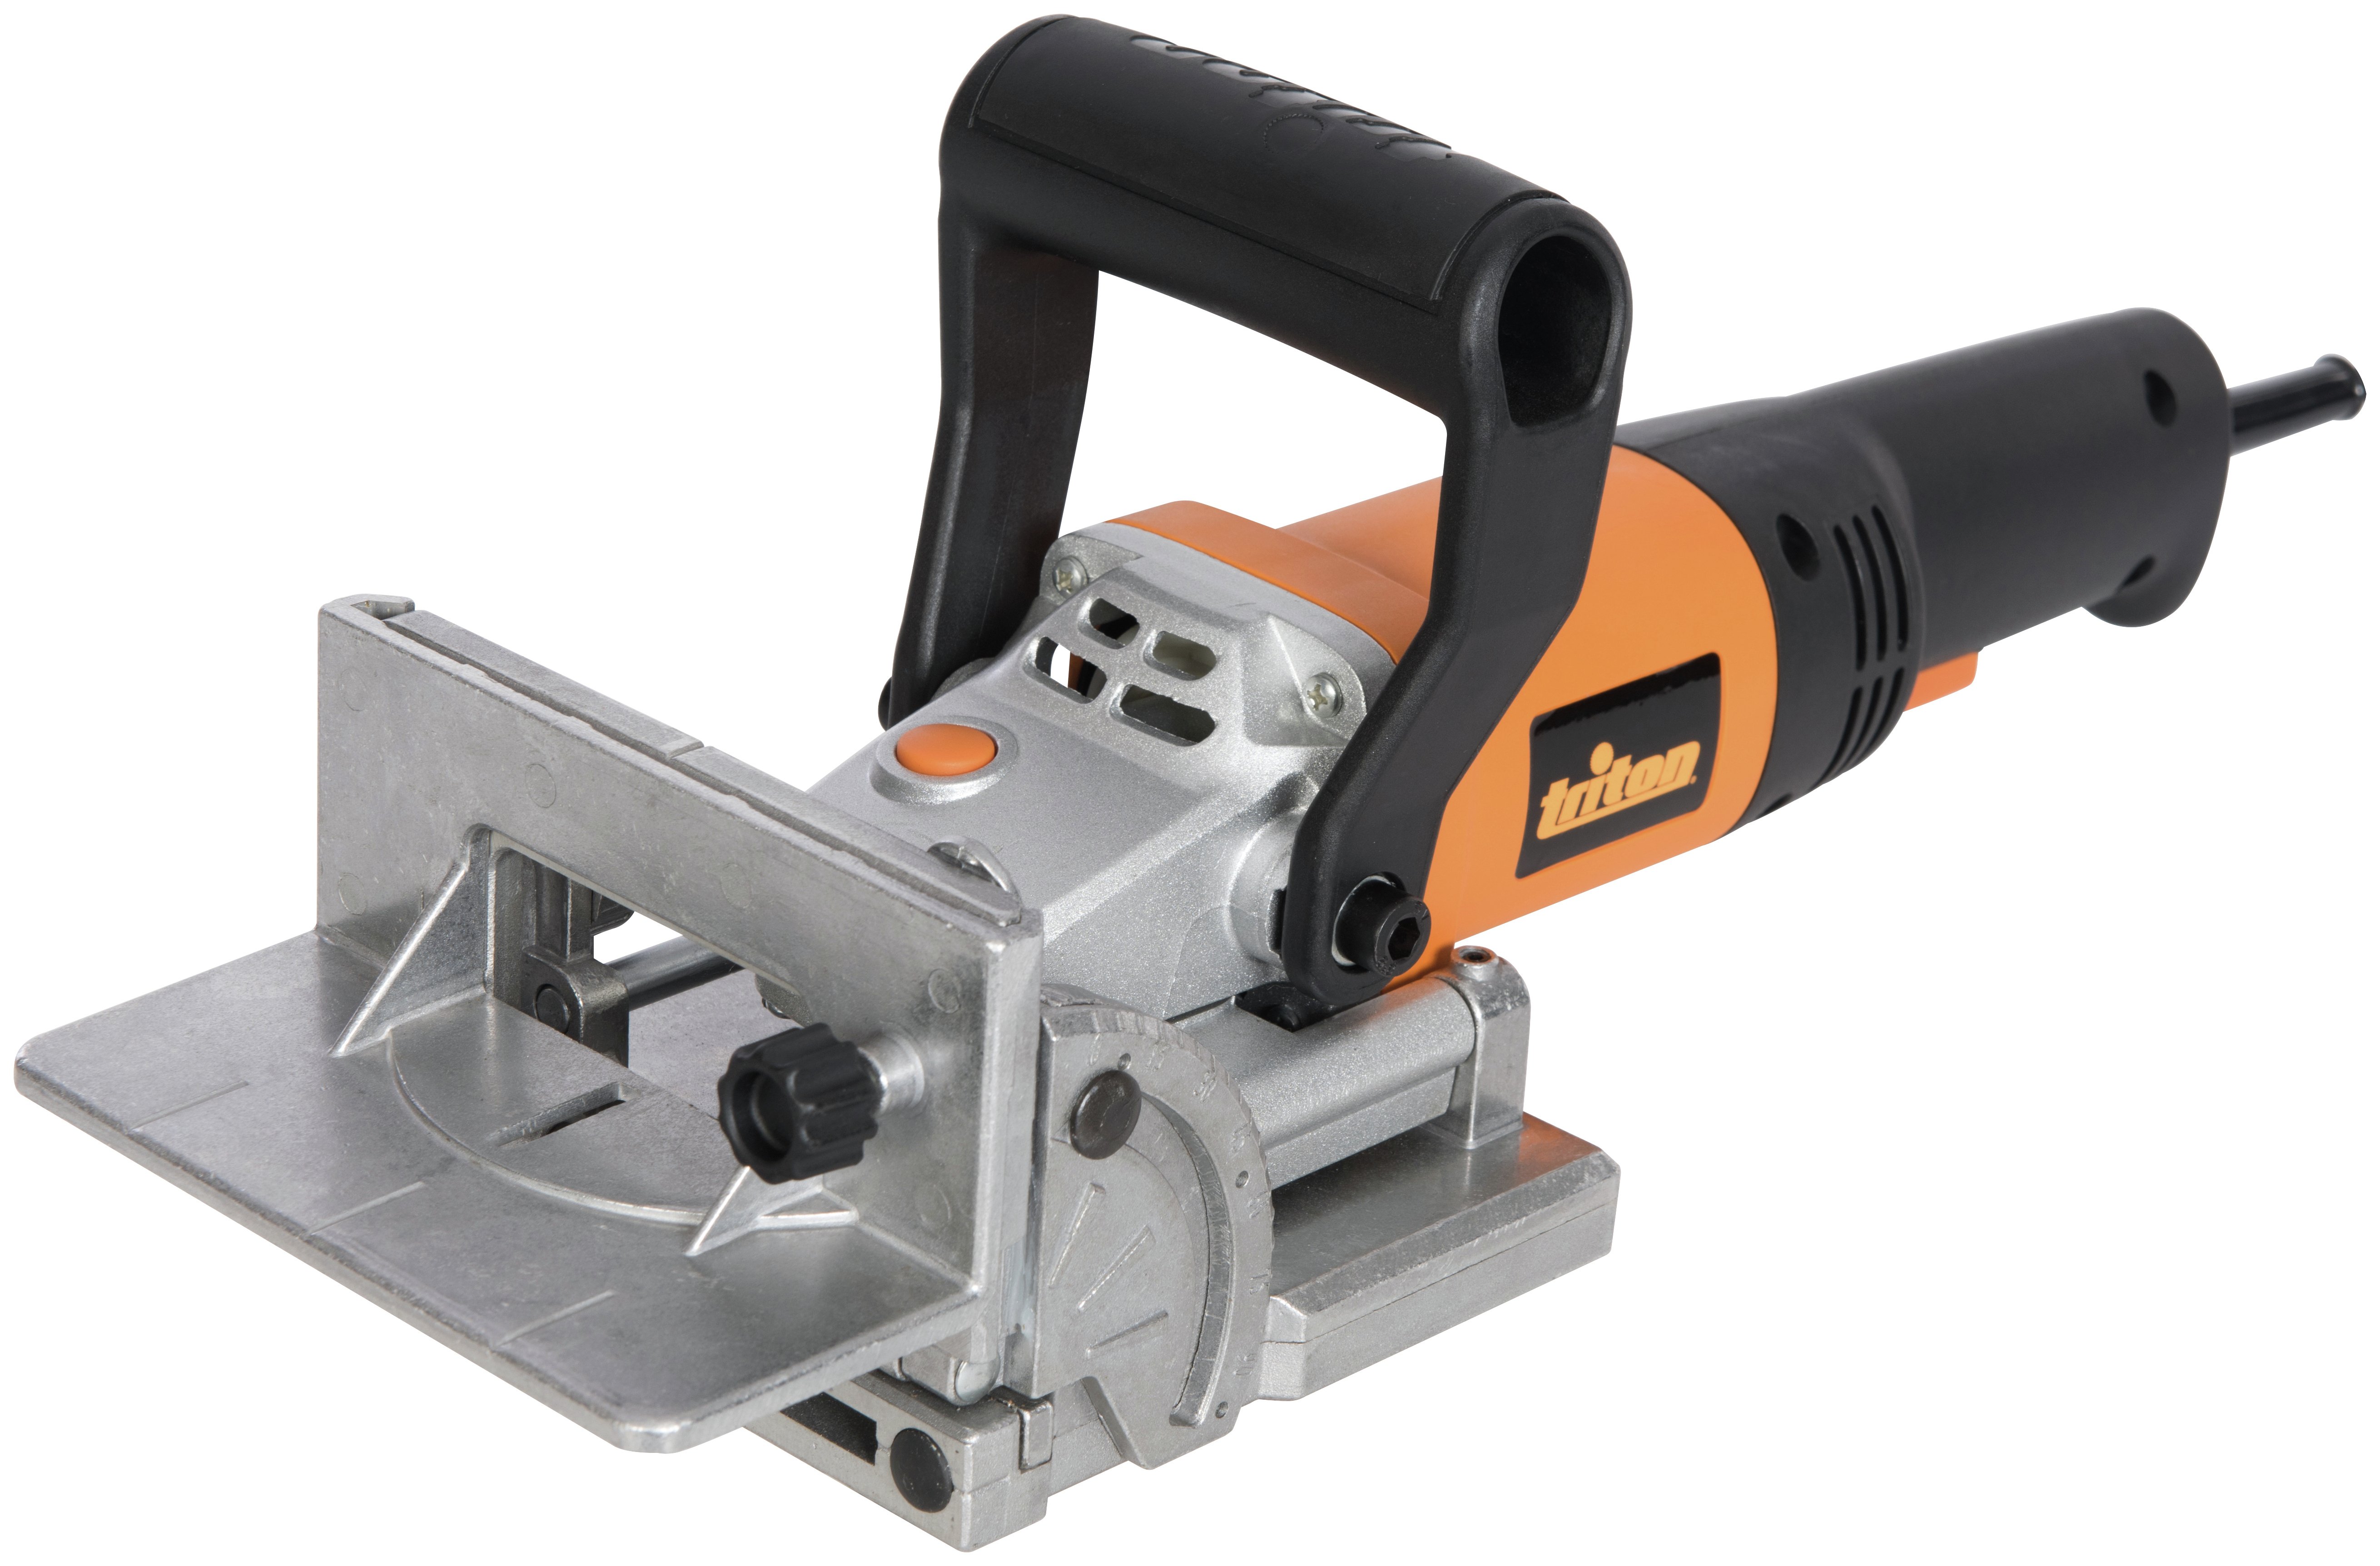 Triton Biscuit Jointer - 760W